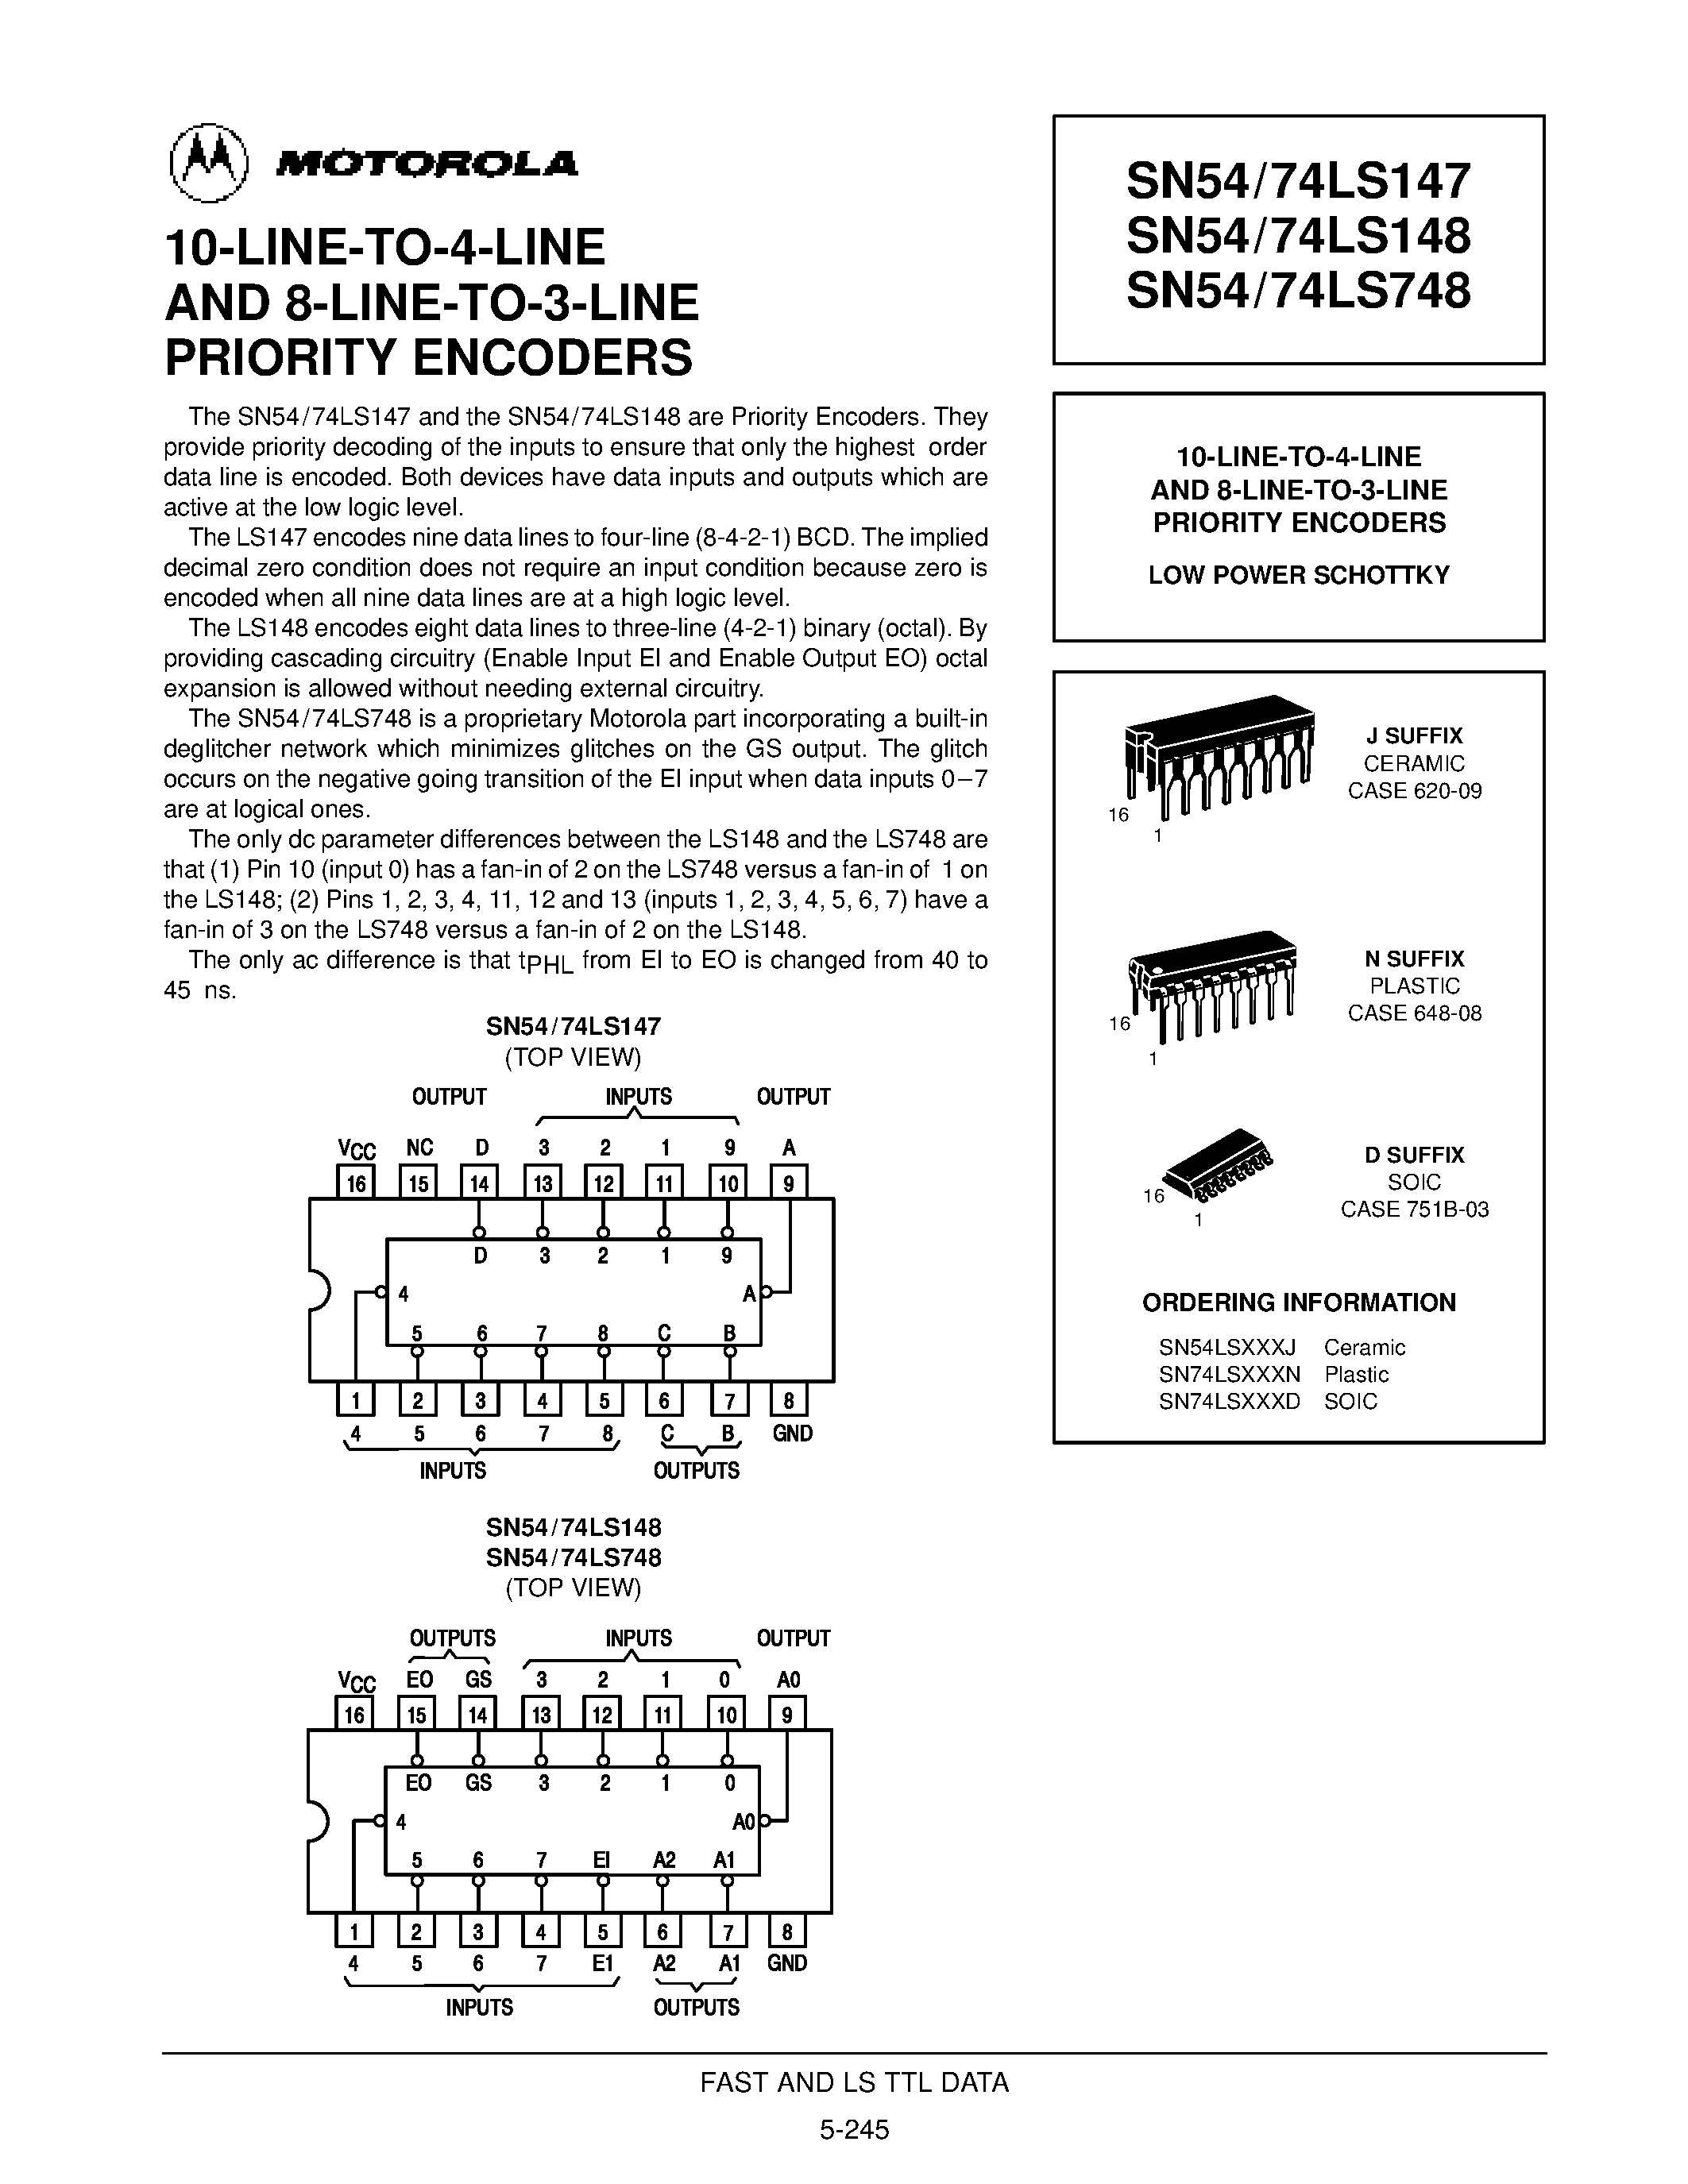 Datasheet SN74LS748N - 10-LINE-TO-4-LINE AND 8-LINE-TO-3-LINE PRIORITY ENCODERS page 1